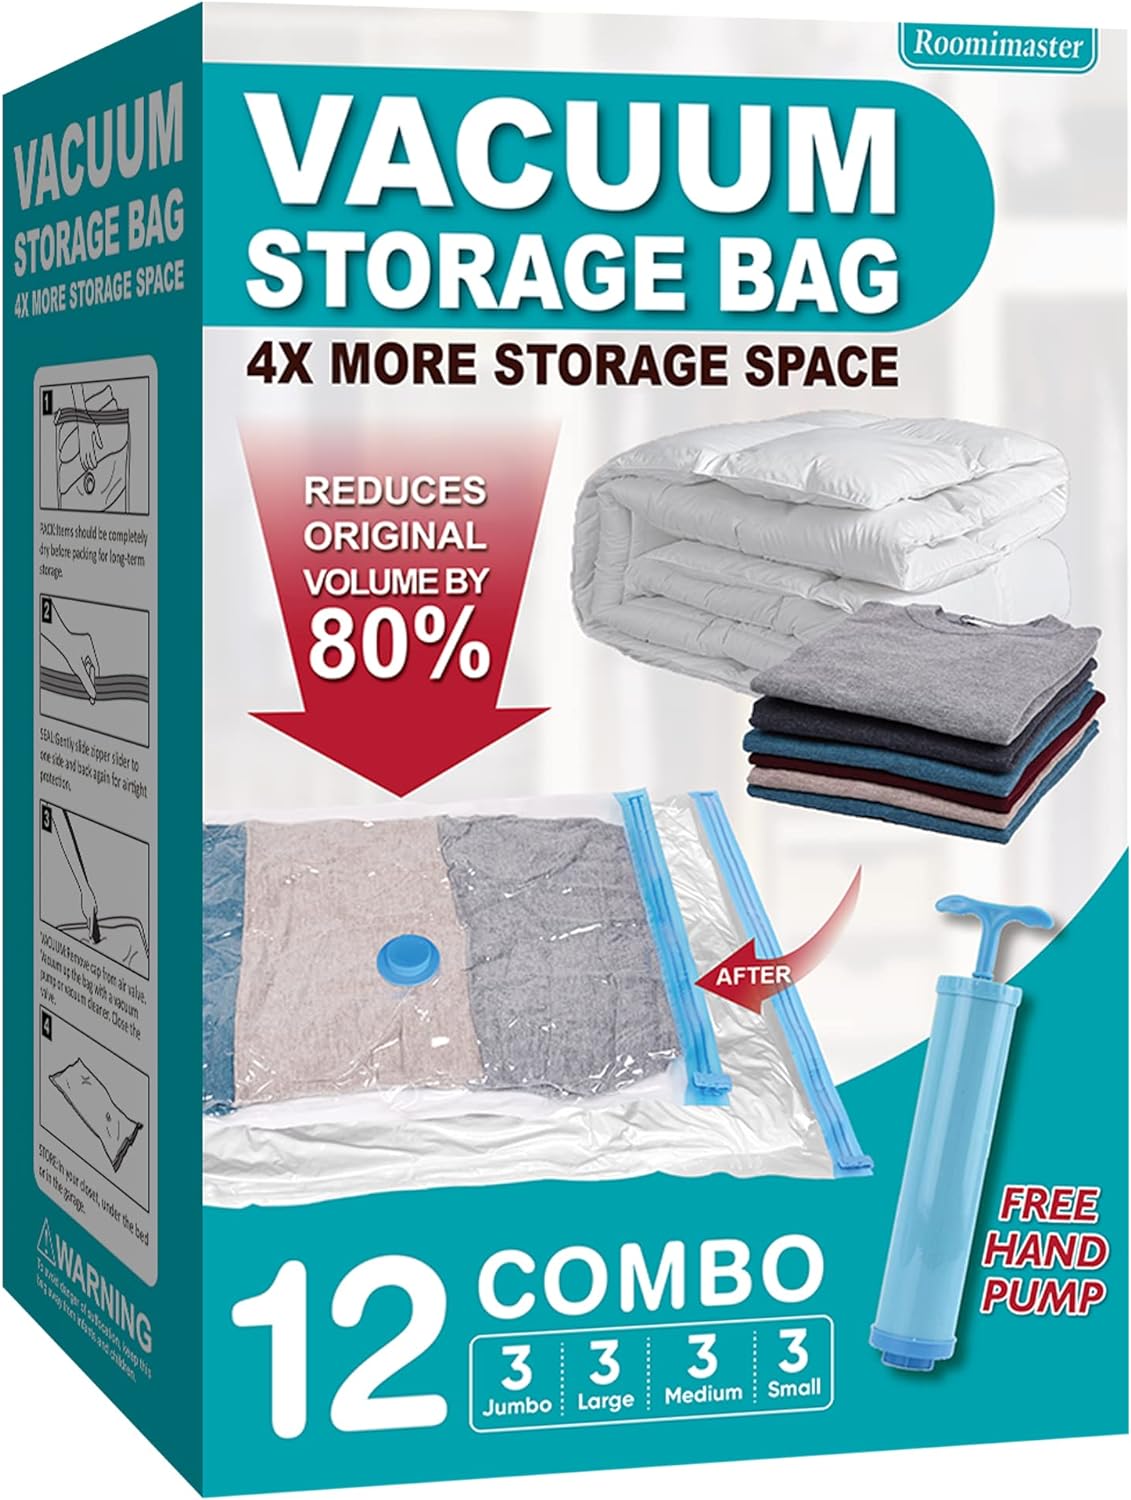 Vacuum Storage Bags, 10 Jumbo Space Saver Bags Vacuum Seal Bags with Pump, Space Bags, Vacuum Sealer Bags for Clothes, Comforters, Blankets, Bedding-A